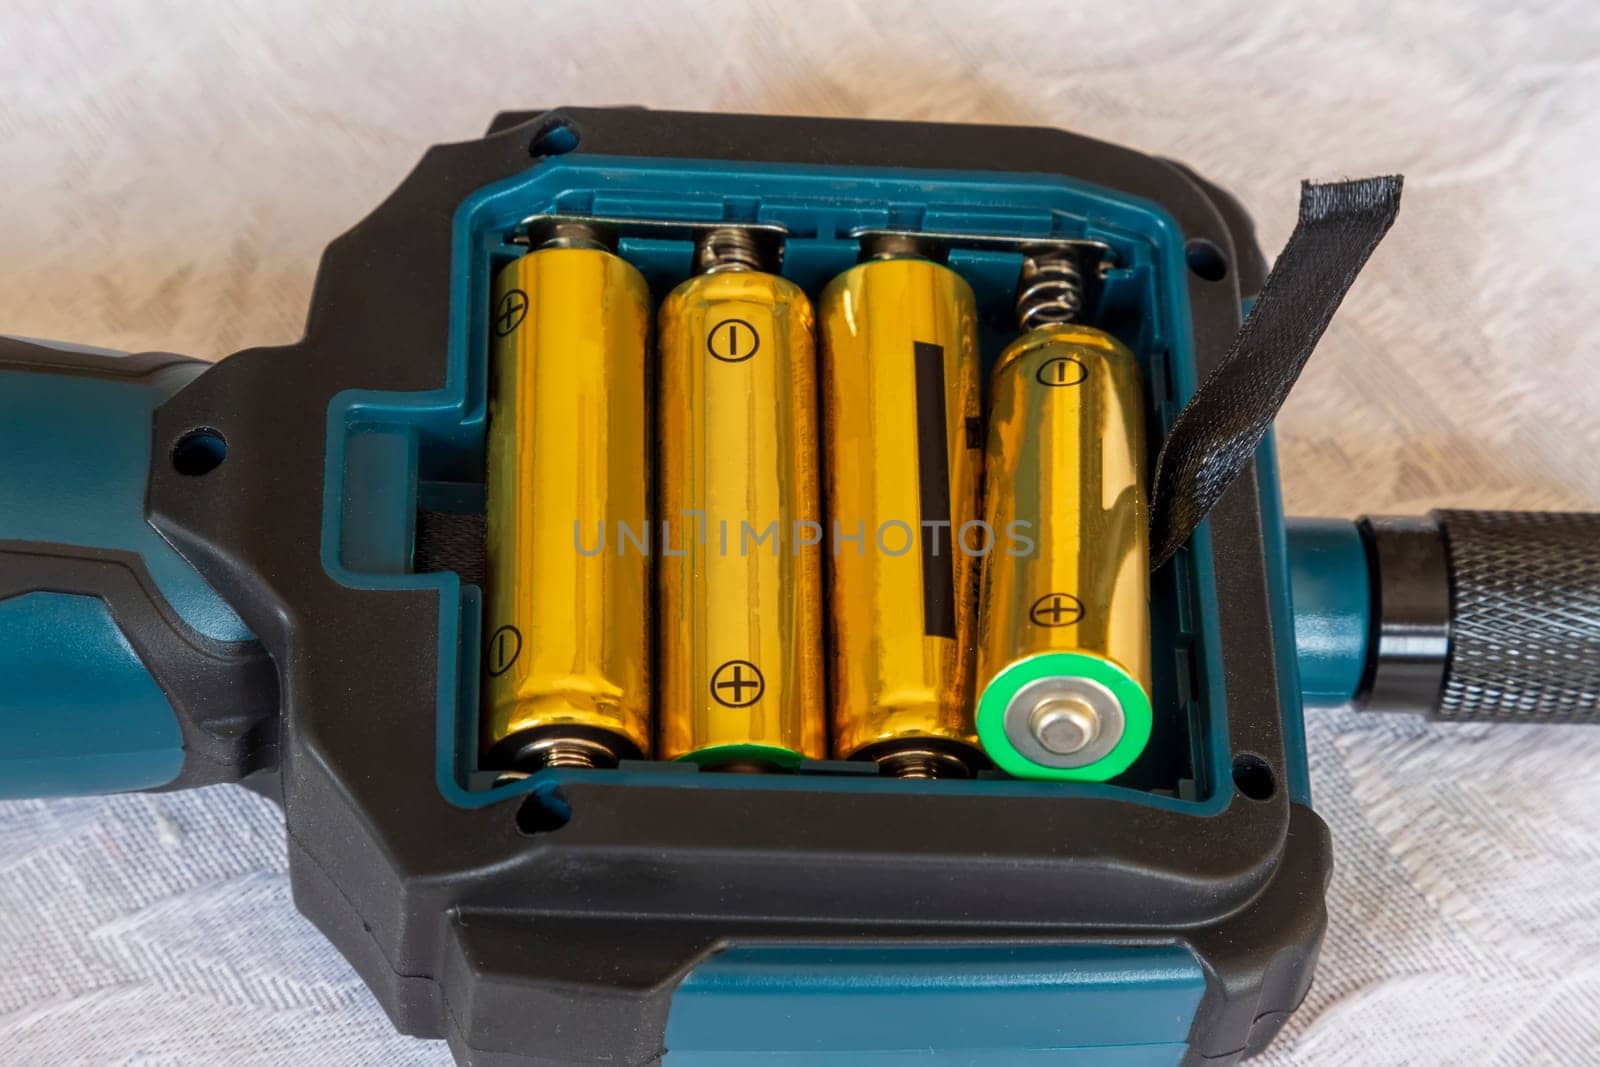 putting new batteries in a device or replacement